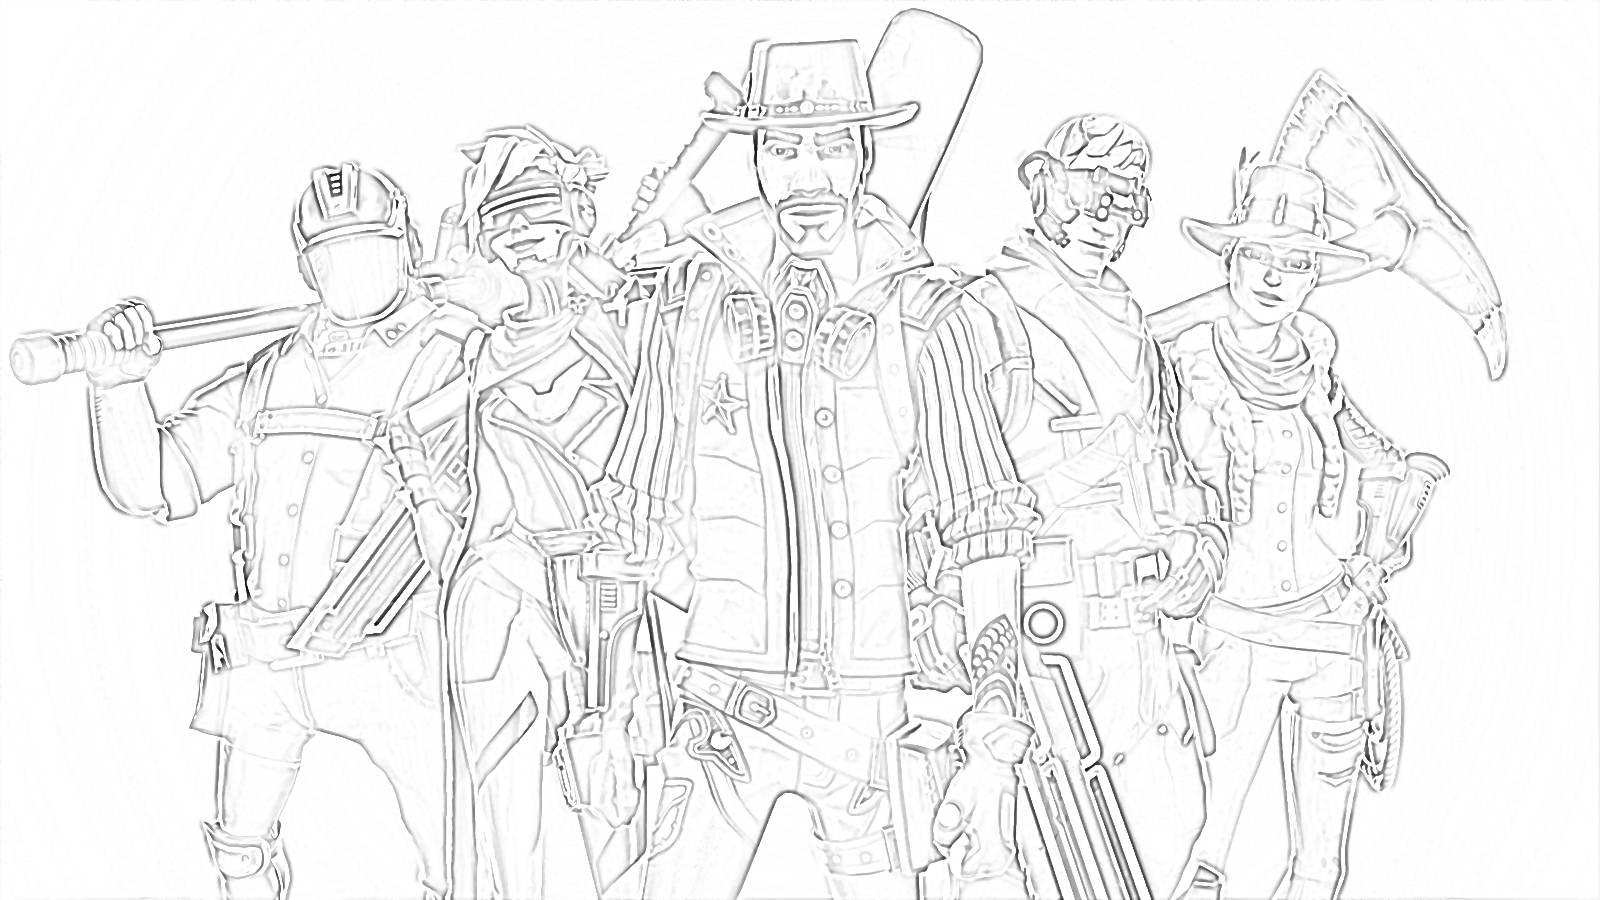 Fortnite Heroes - Coloring page